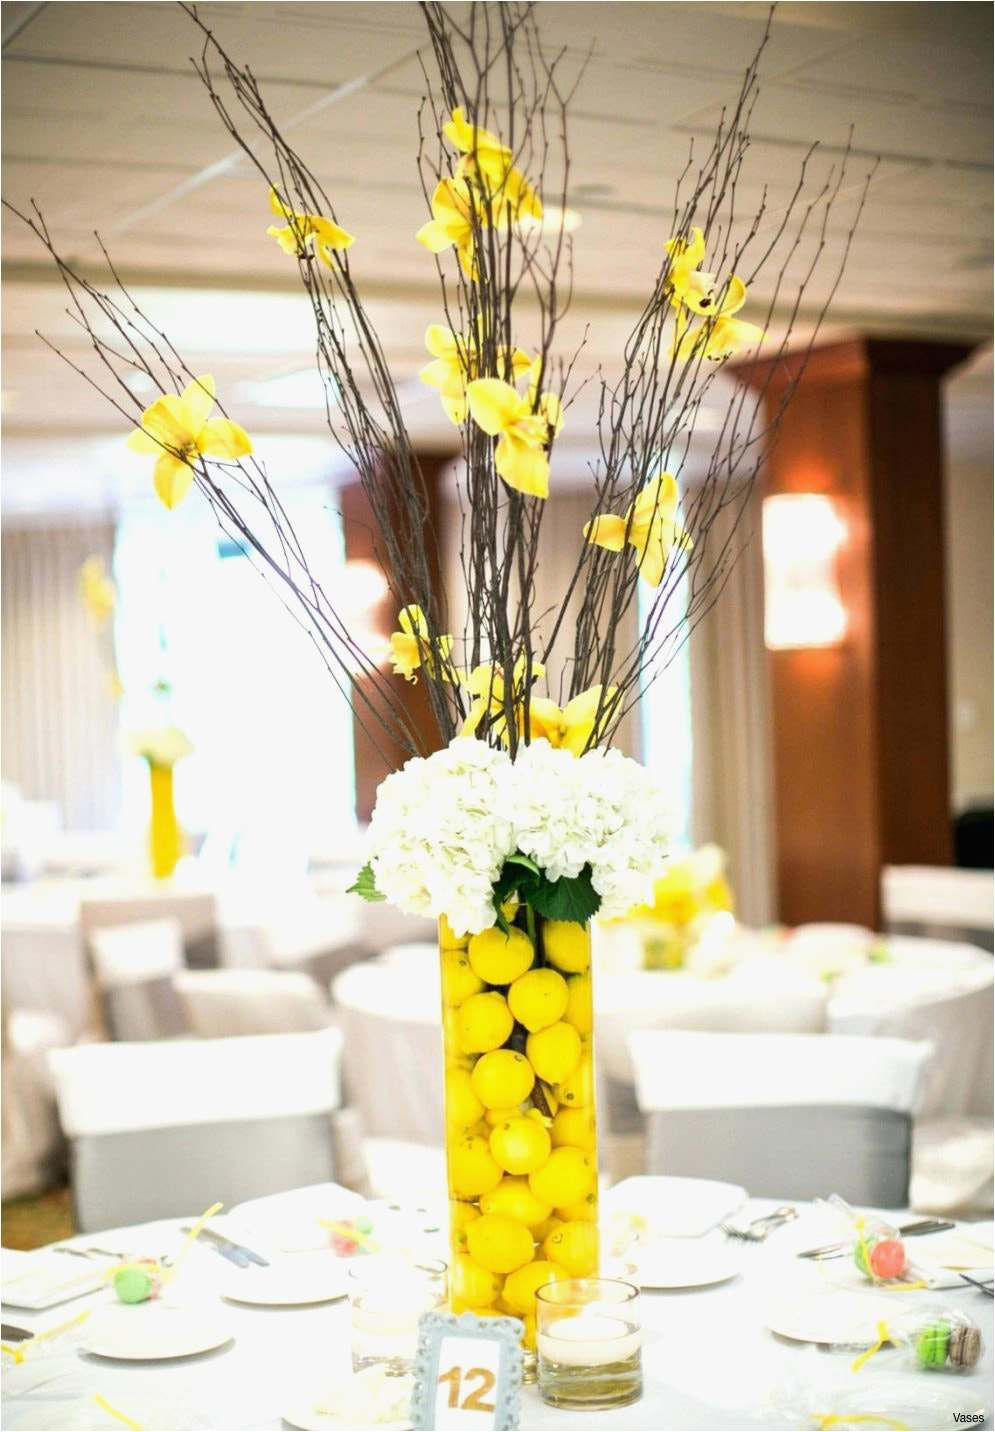 26 Best Cheap Home Decor Vases 2023 free download cheap home decor vases of diy wedding contemporary diy home decor vaseh vases decorative for diy wedding pictures wedding flower decorations fresh 717 best diy wedding decor new design